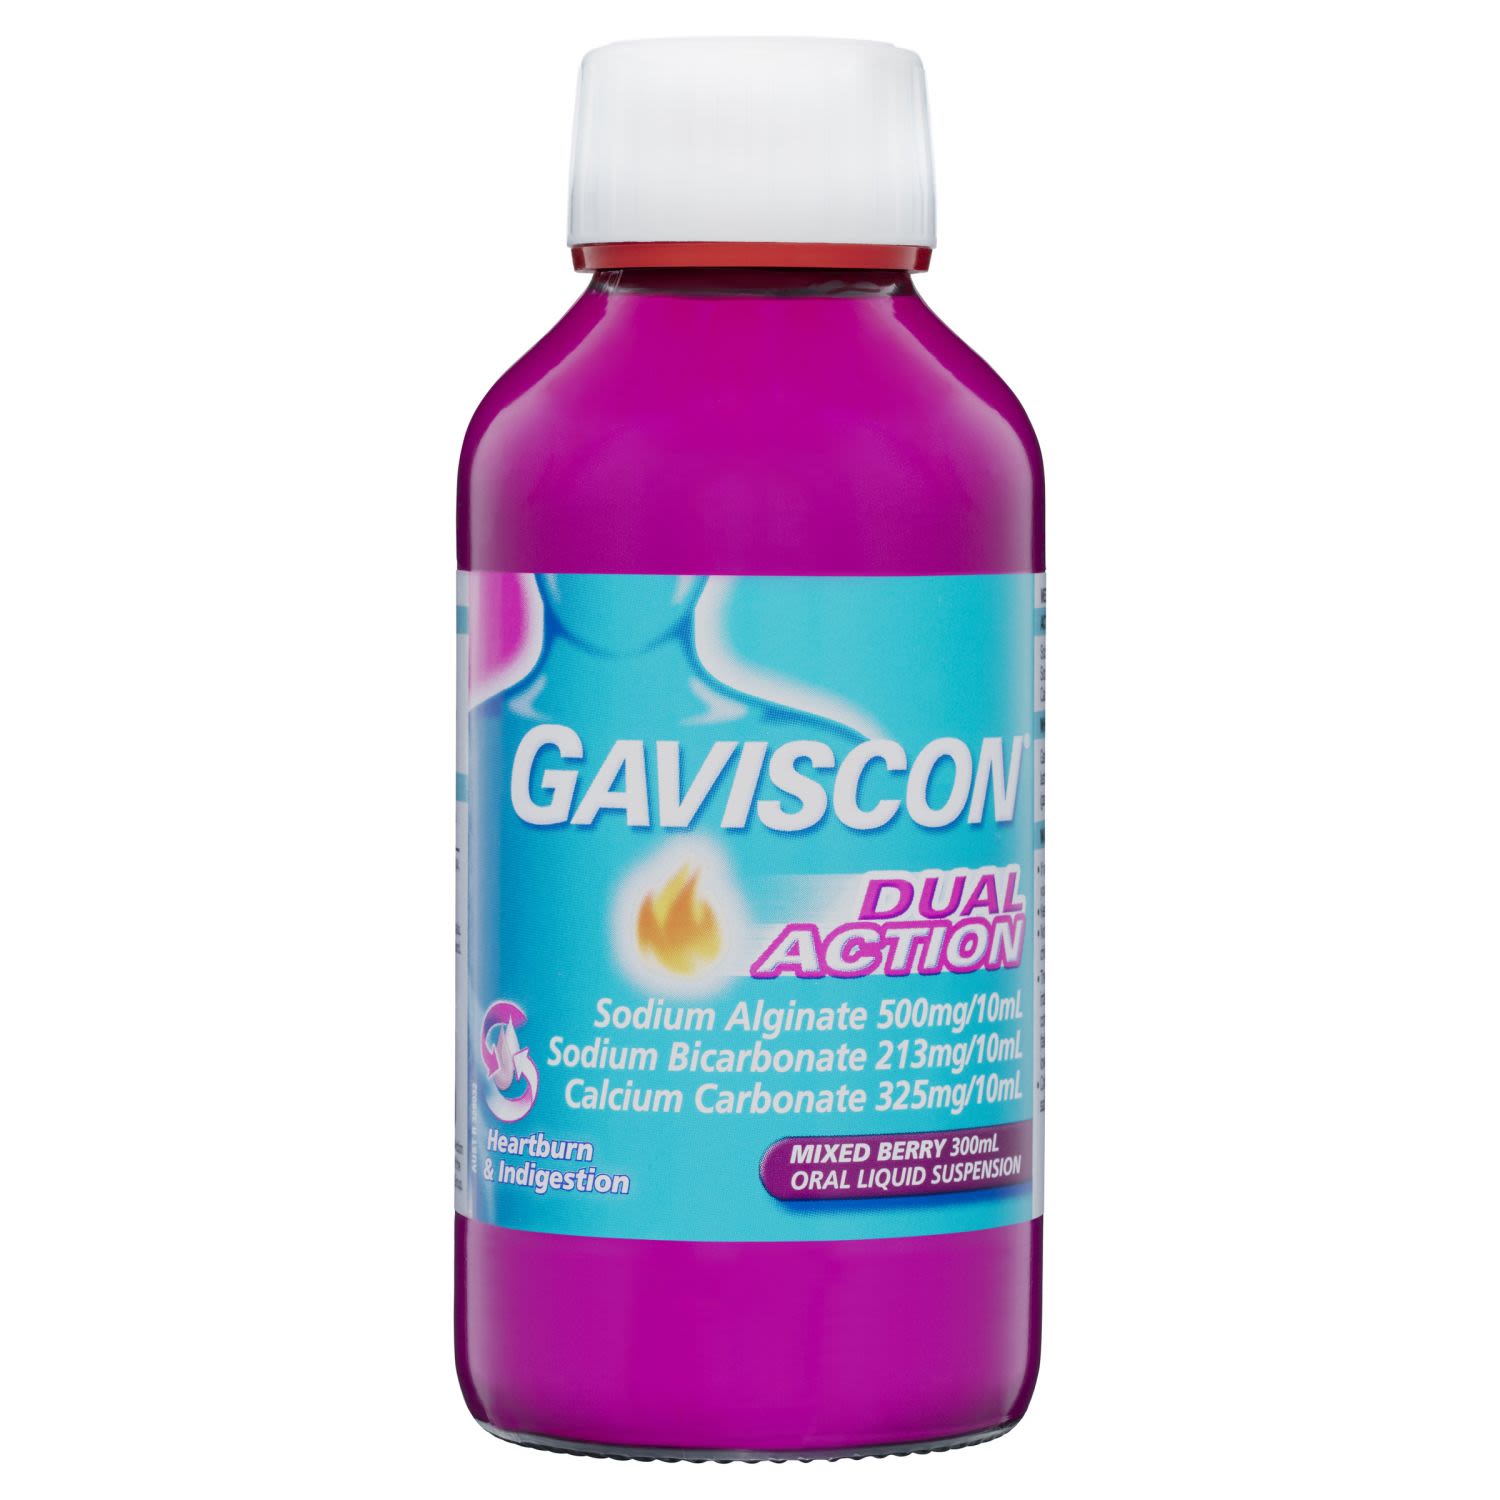 Gaviscon Dual Action Liquid Mixed Berry Flavour Heartburn and Indigestion Relief, 300 Millilitre